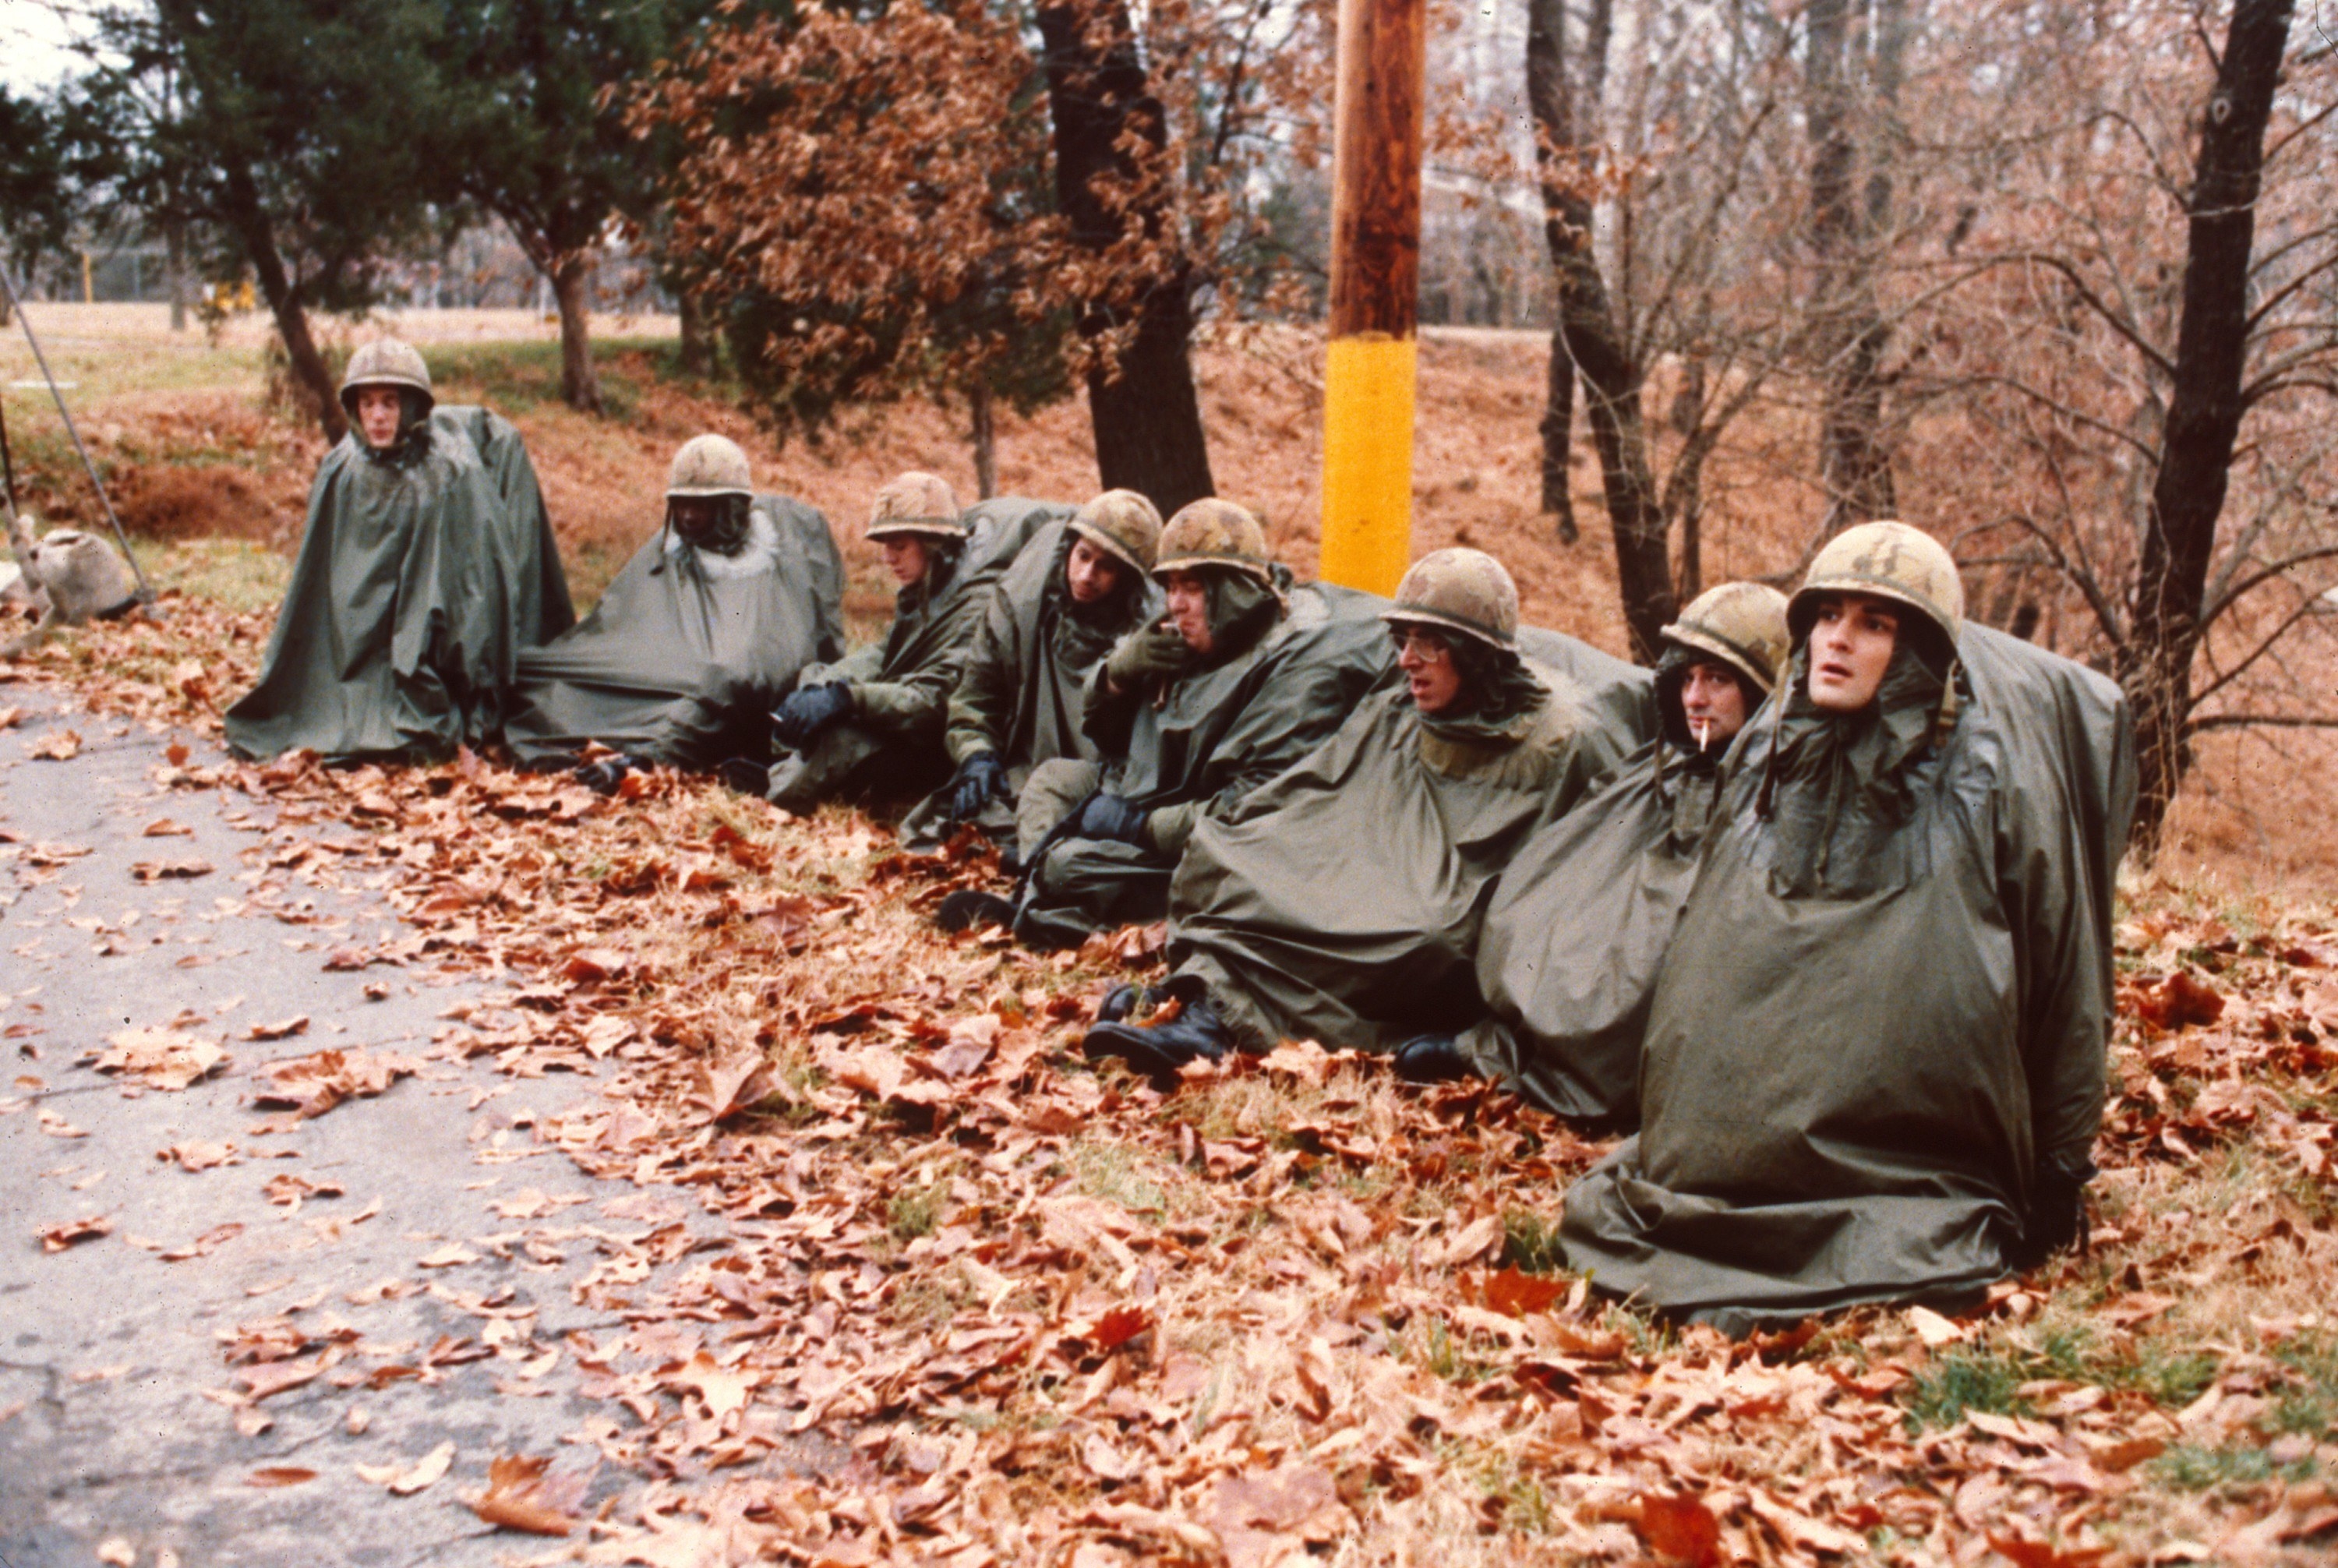 People wearing helmets and sitting in a row wearing tarpaulin-type capes